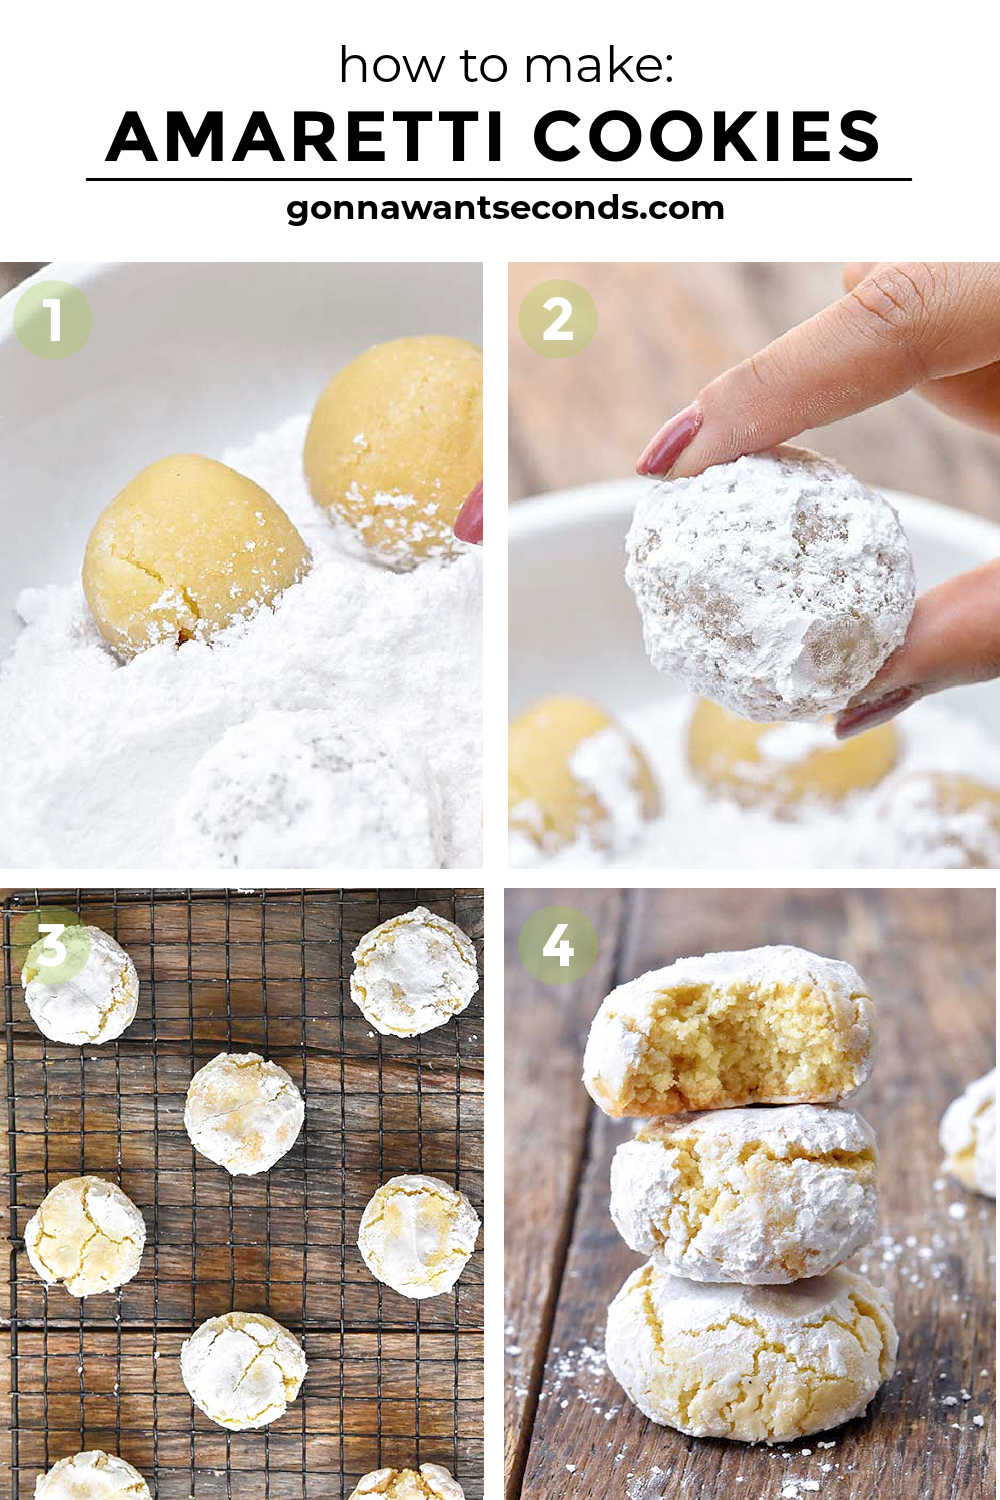 Step by step how to make amaretti cookies